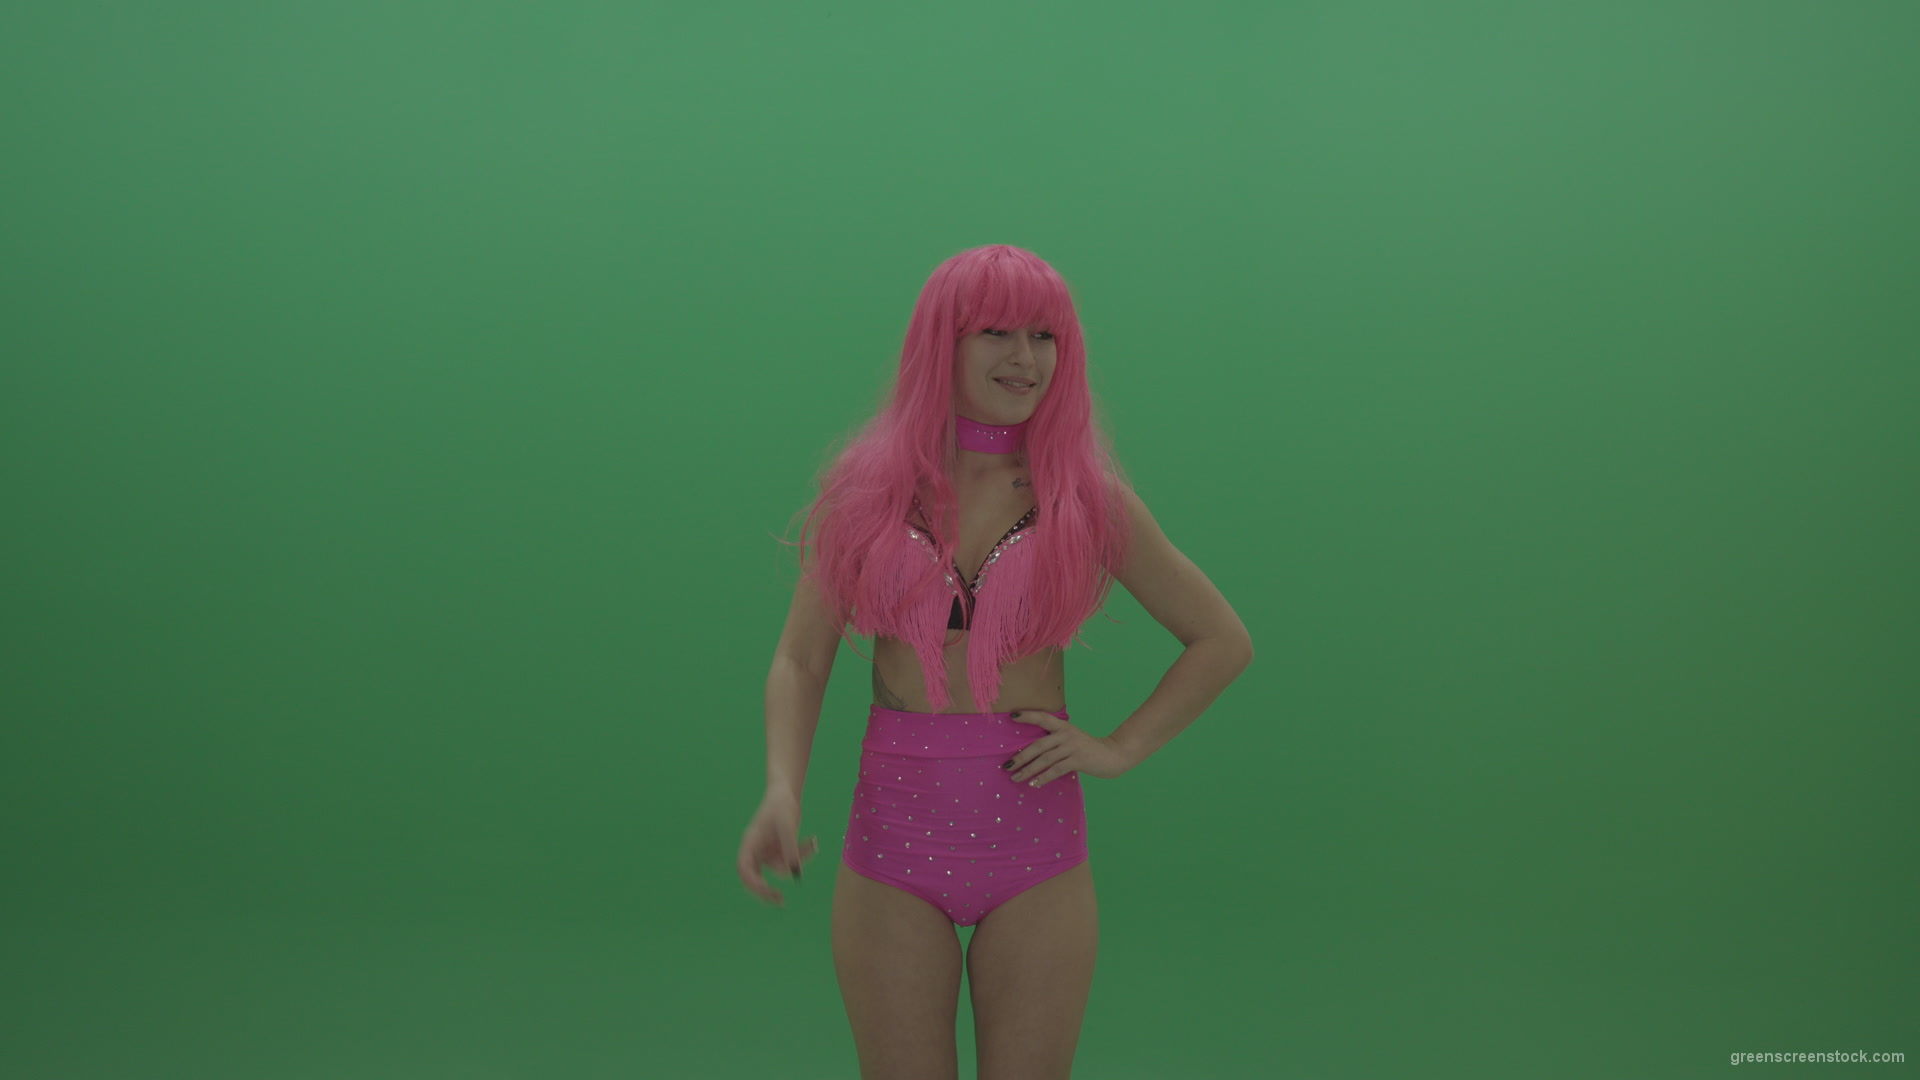 Gogo-dancer-in-pink-displays-an-amazing-pose-over-chromakey-background_006 Green Screen Stock